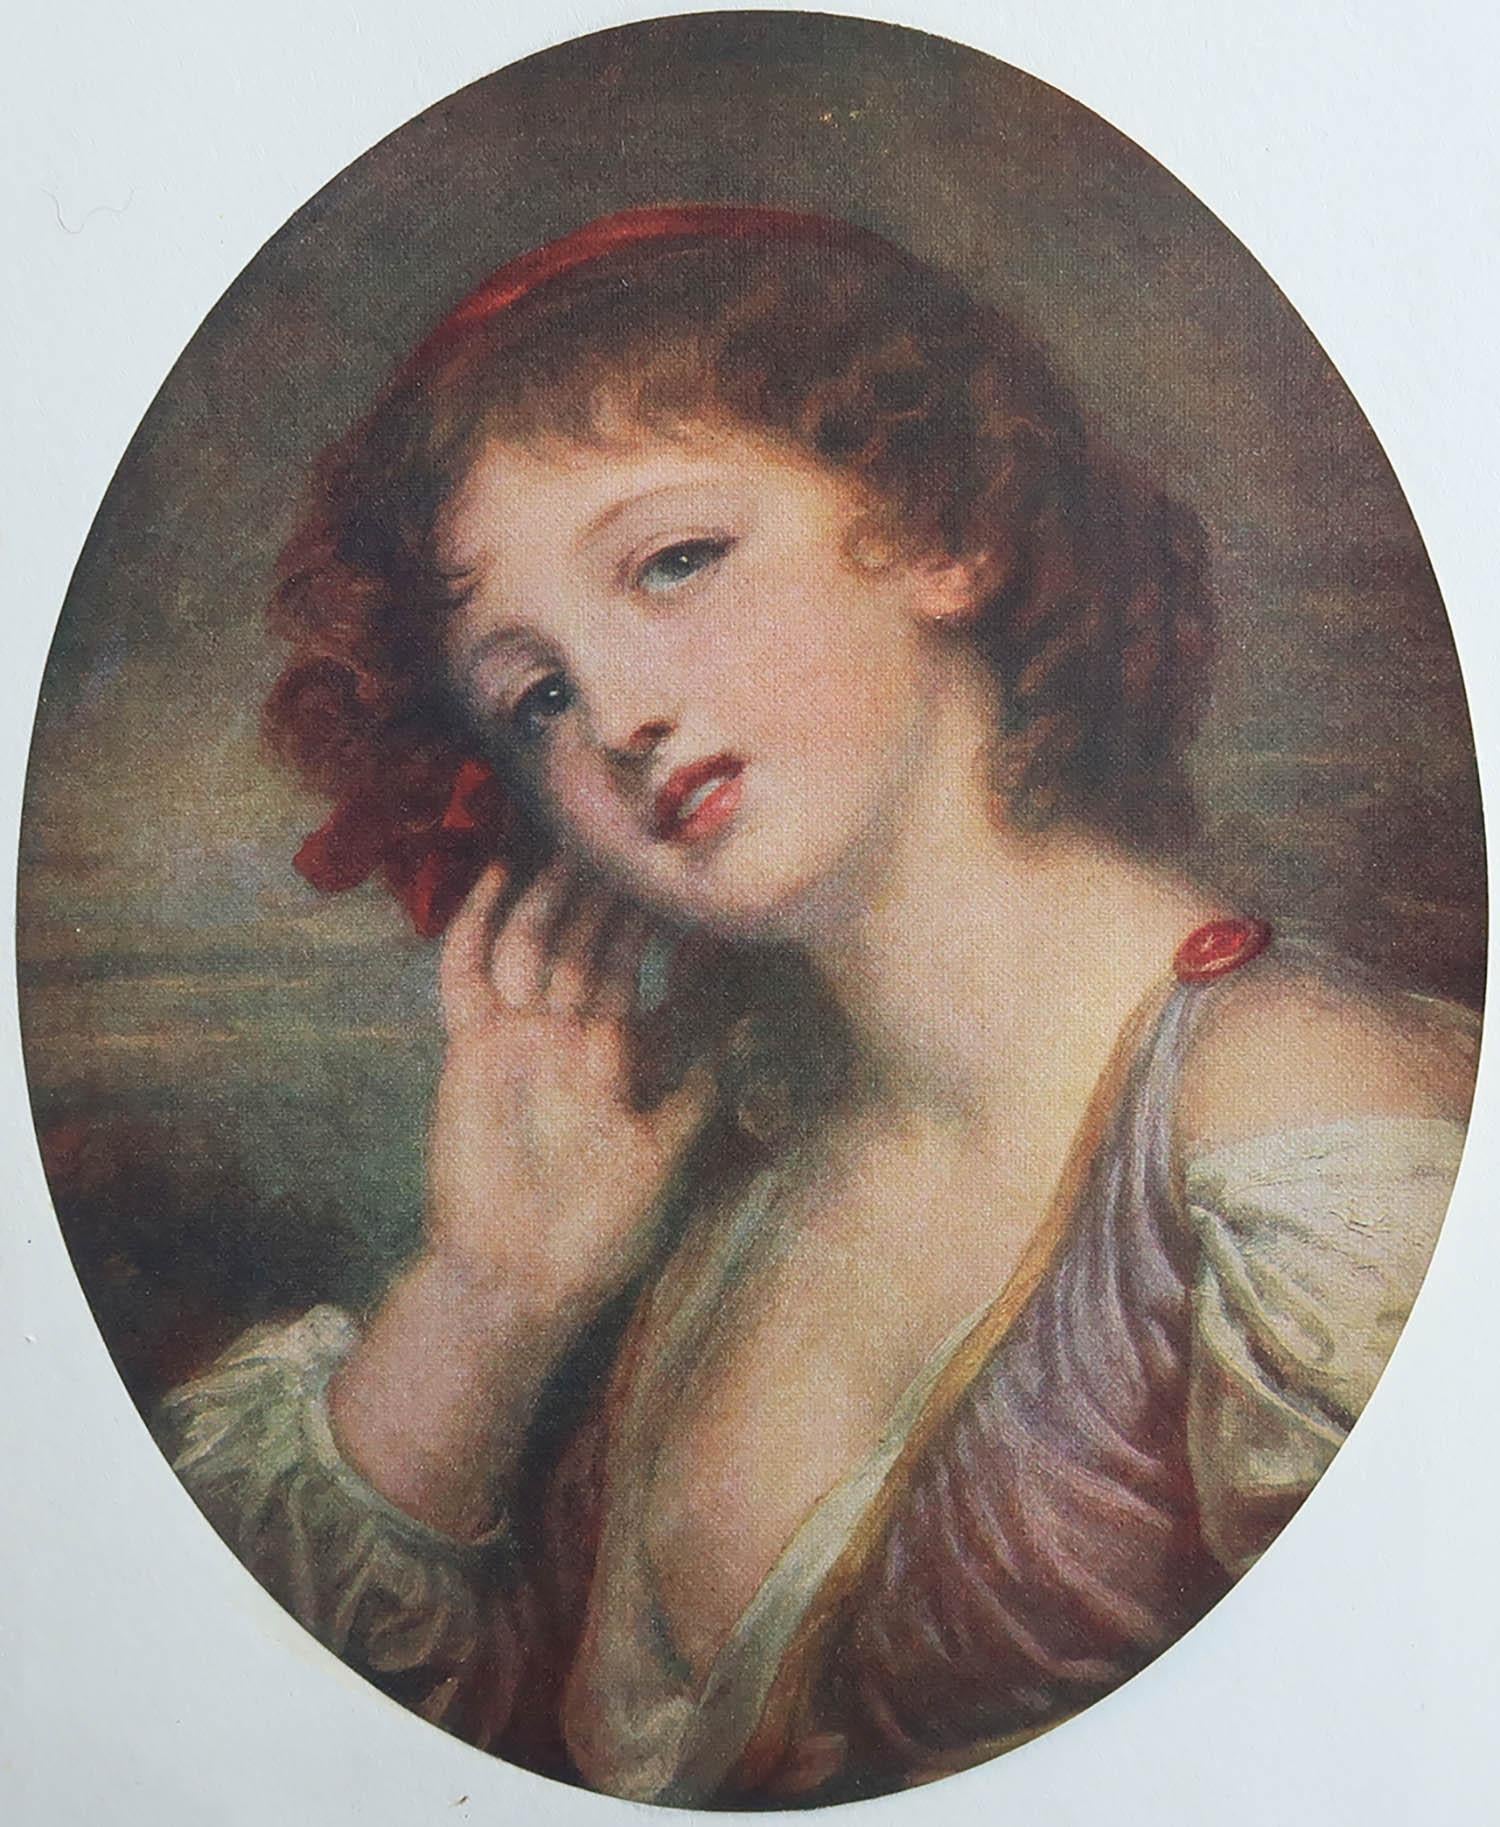 Wonderful print after Greuze

Lovely colors.

Tipped in plate on good quality paper

Chromolithograph 

Published circa 1920

The measurement given below is the off white paper size, not the actual image.

Unframed.

